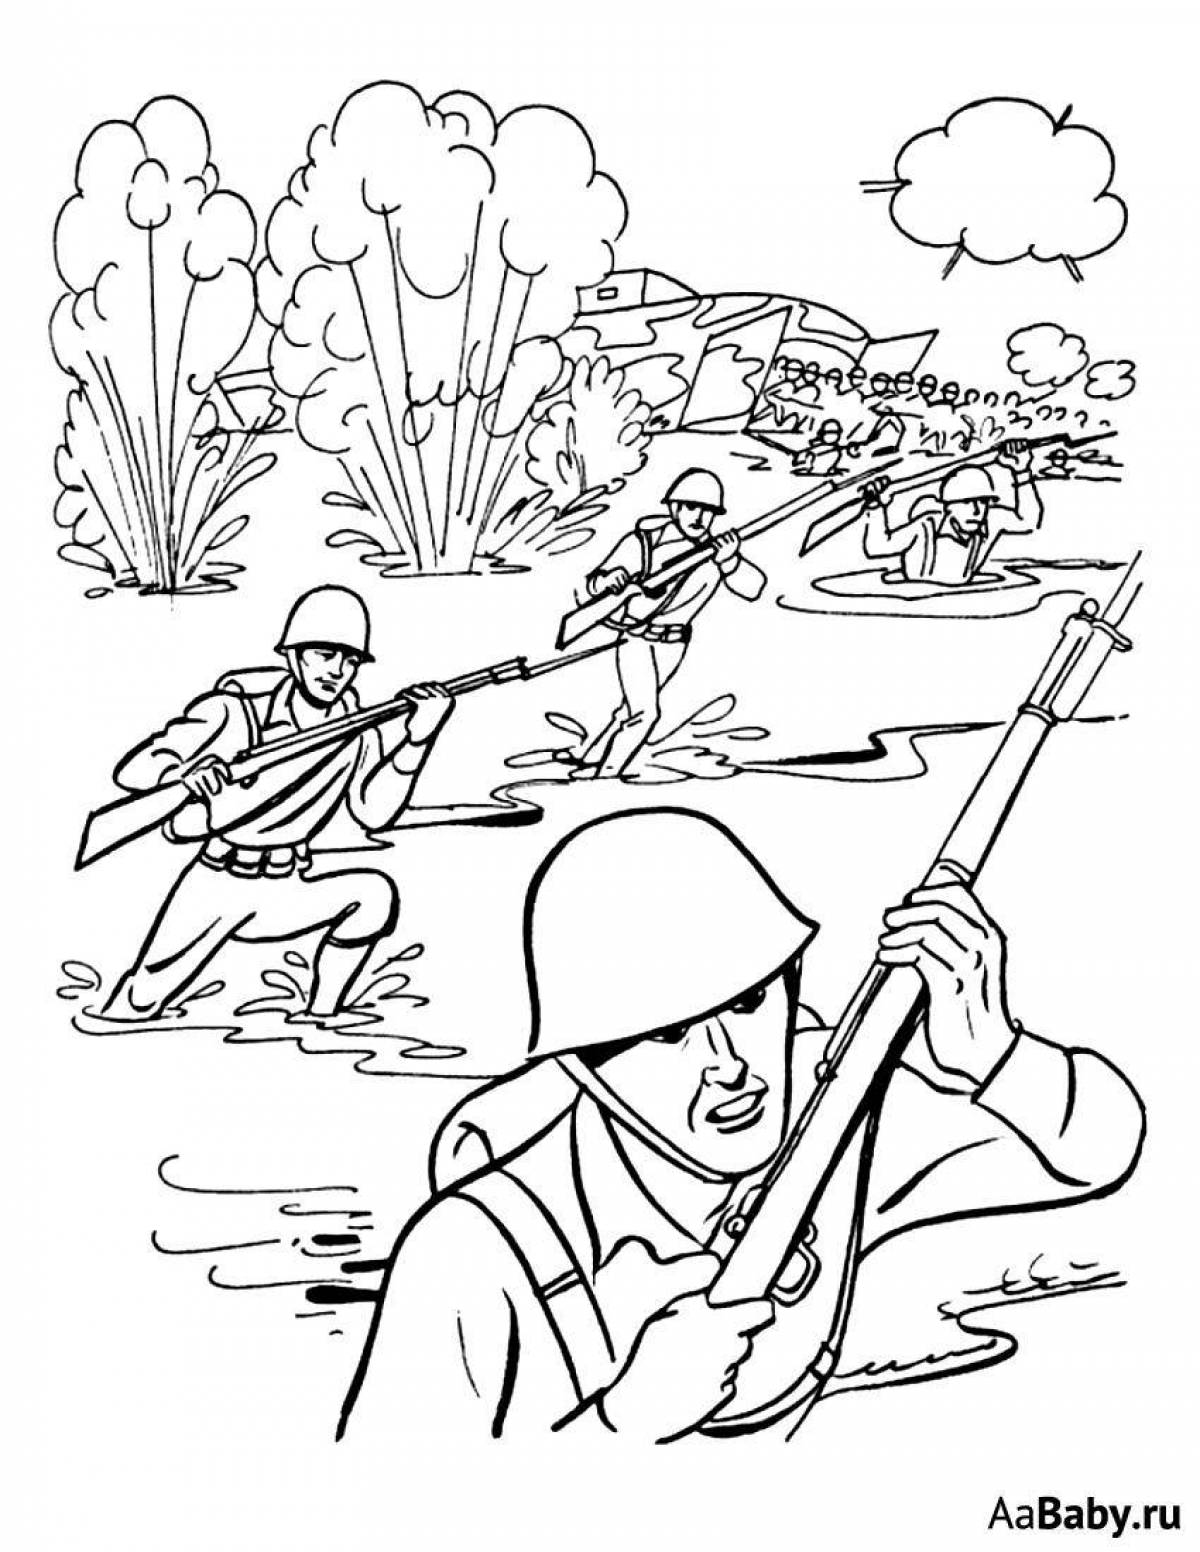 Deluxe coloring of the battle of Stalingrad